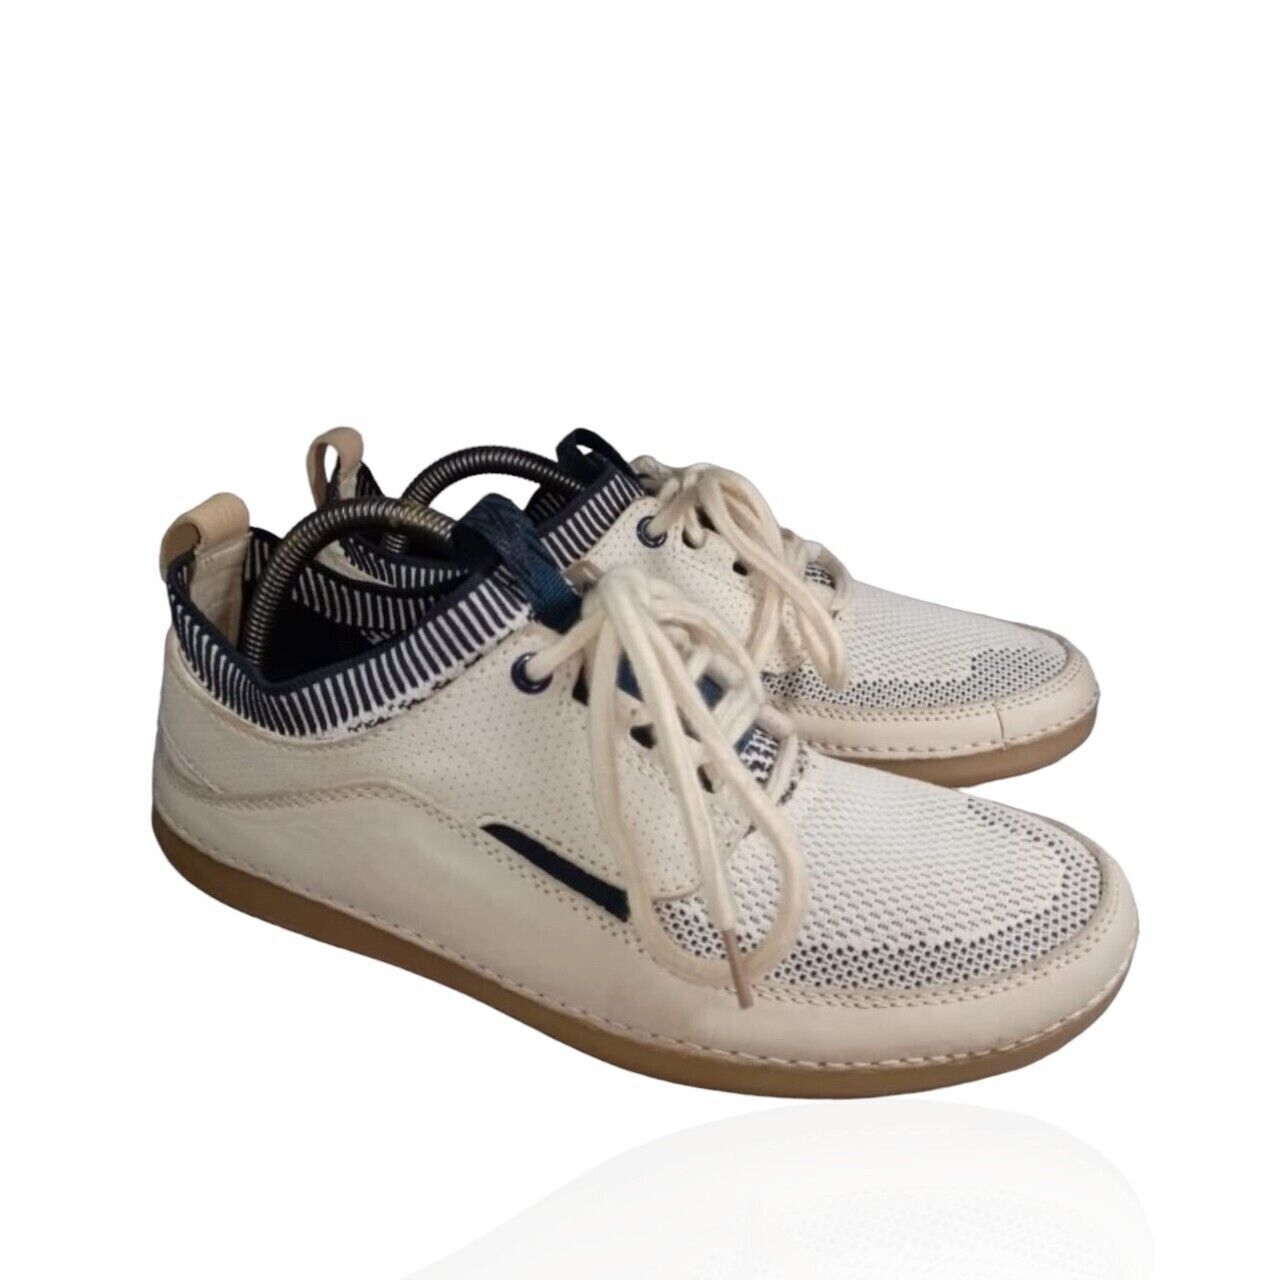 Clarks Nature White Cream Leather Textile Lace Up Casual Comfort